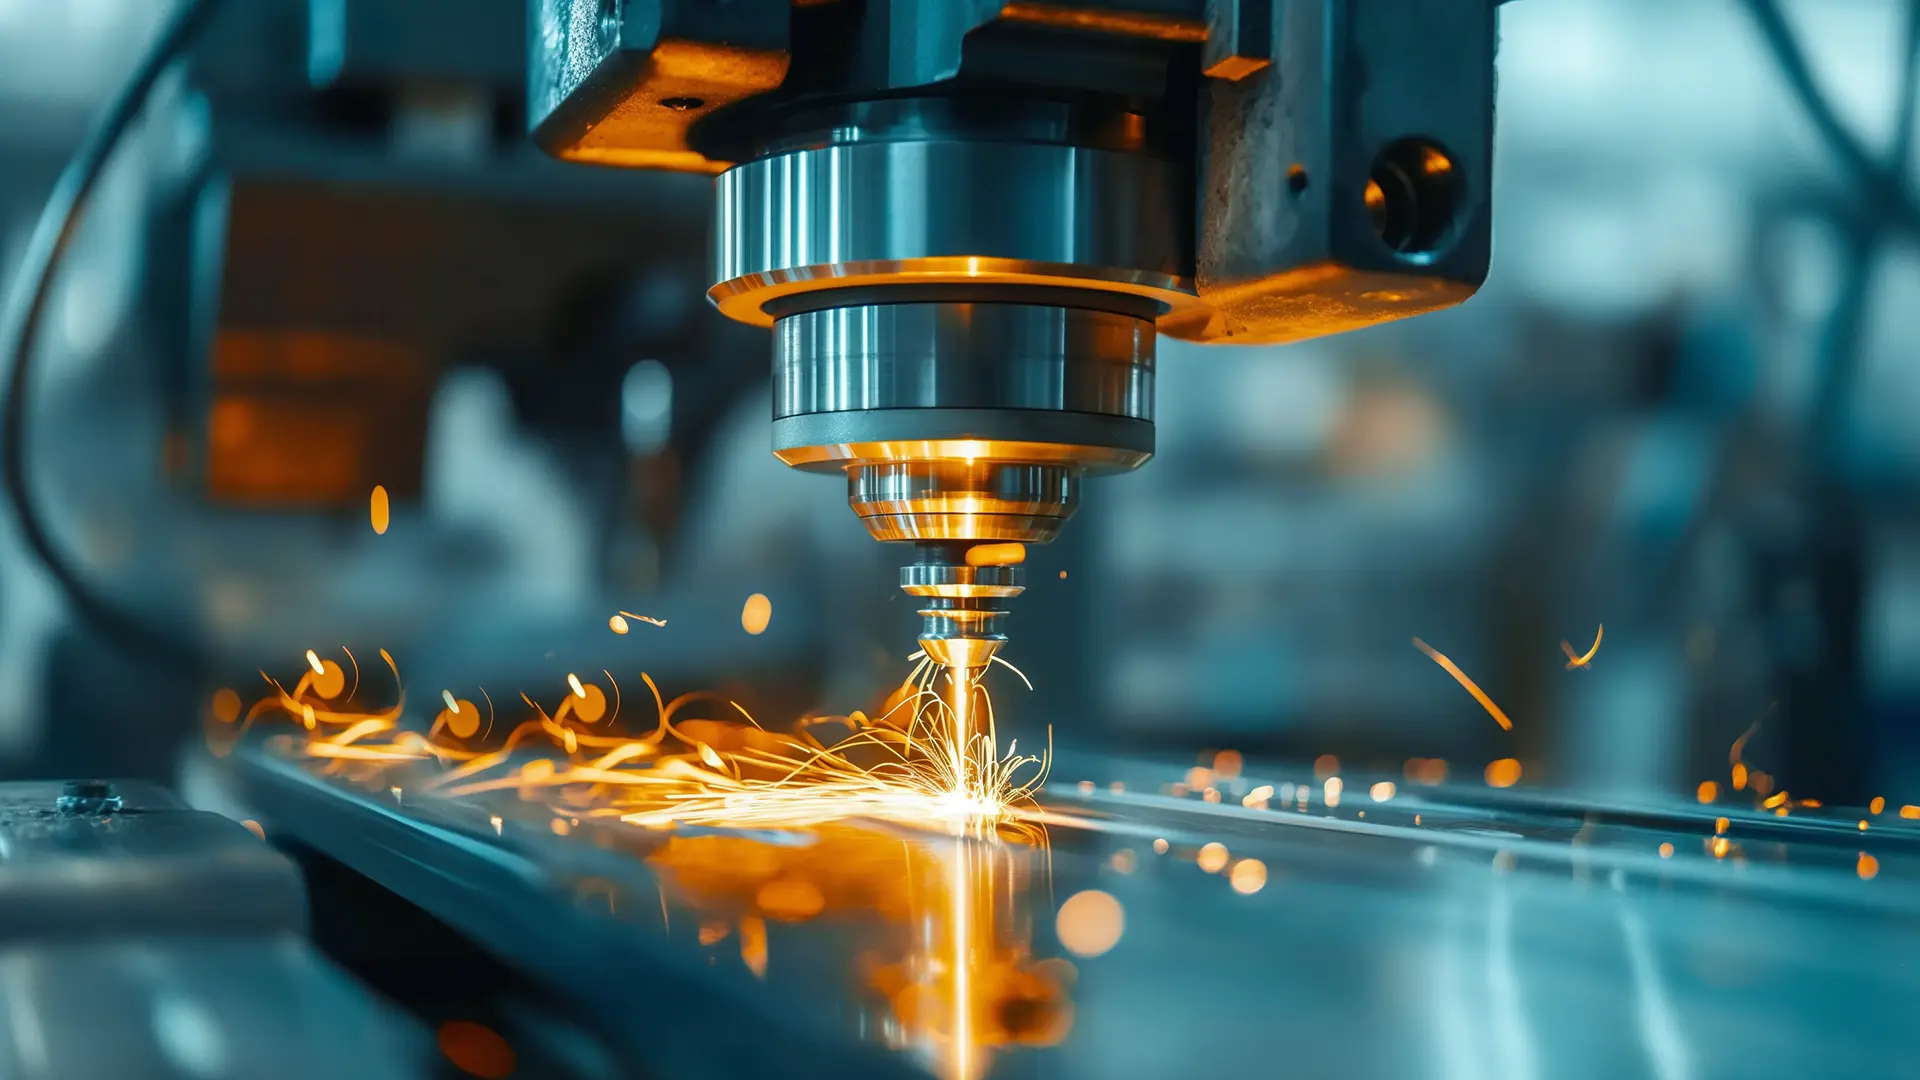 CNC Machining in the 21st Century: What to Expect?